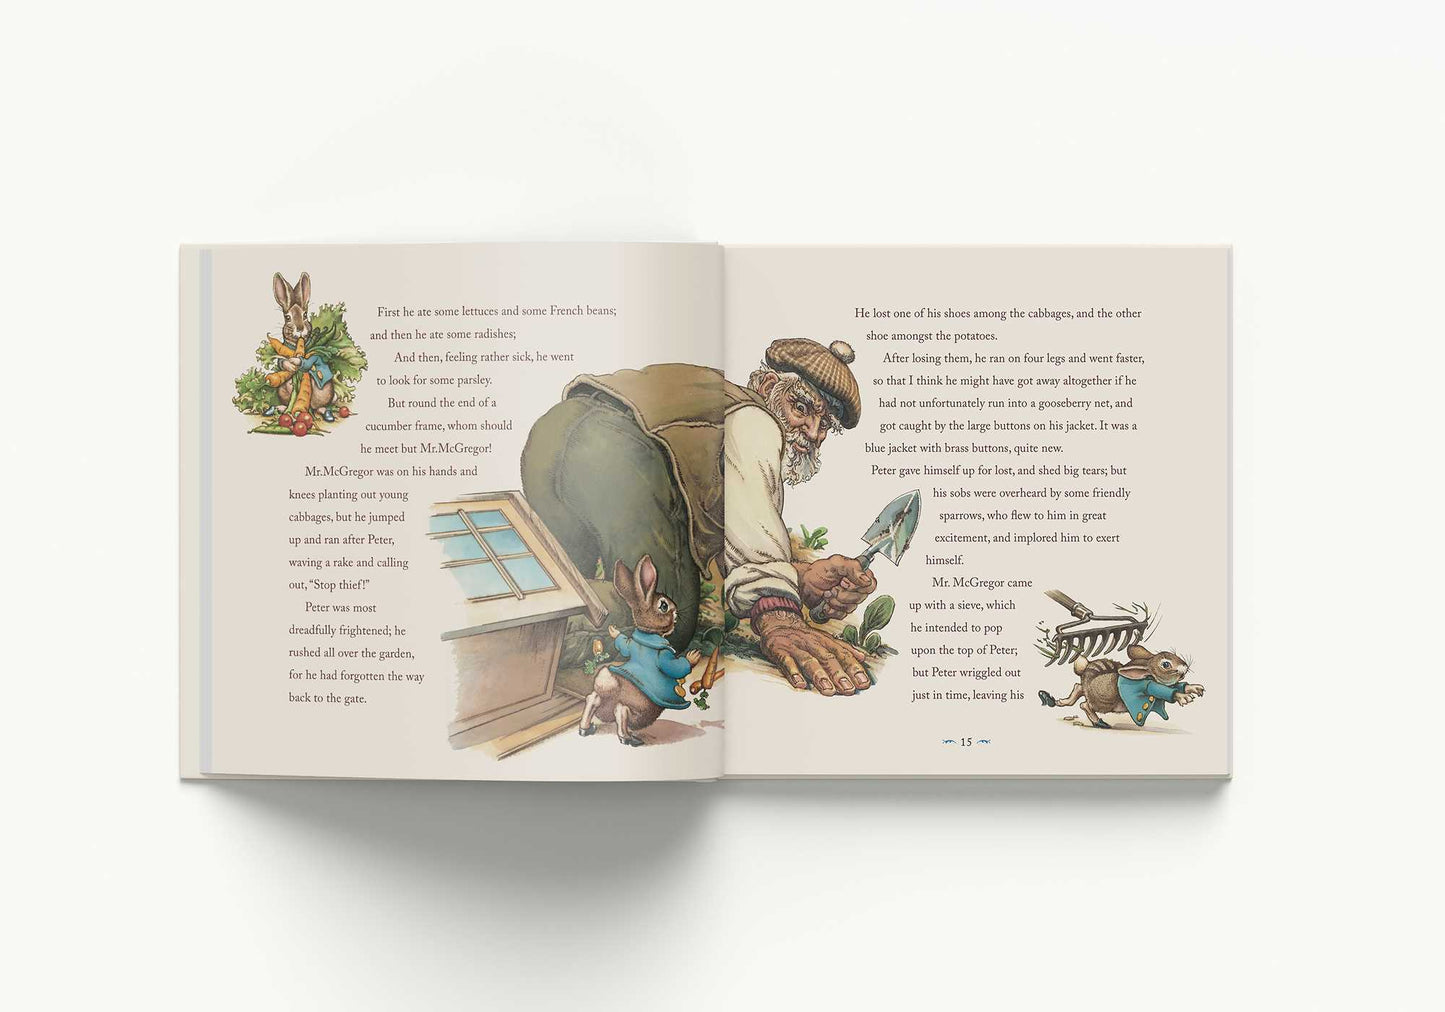 The Classic Tale of Peter Rabbit Hardcover: The Classic Edition by The New York Times Bestselling Illustrator, Charles Santore